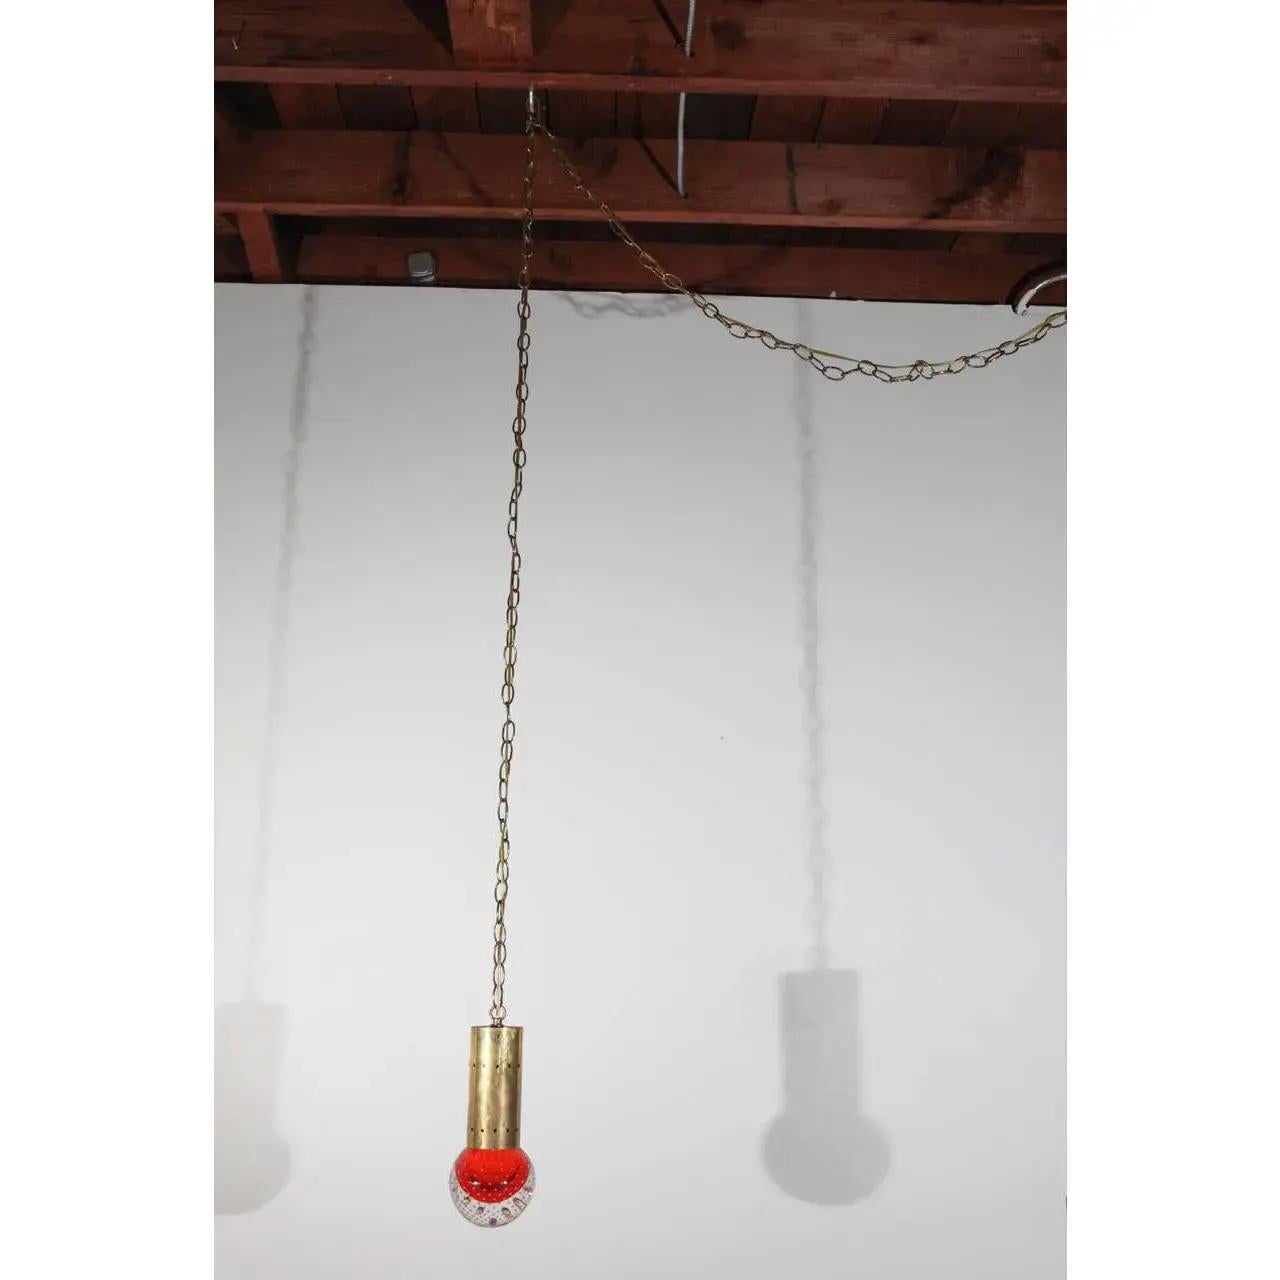 Midcentury pendant with blown glass sphere. Sphere contains controlled bubble inclusions. Fixture has a brass chain, and can be wired for either swag or hard-wired installation.